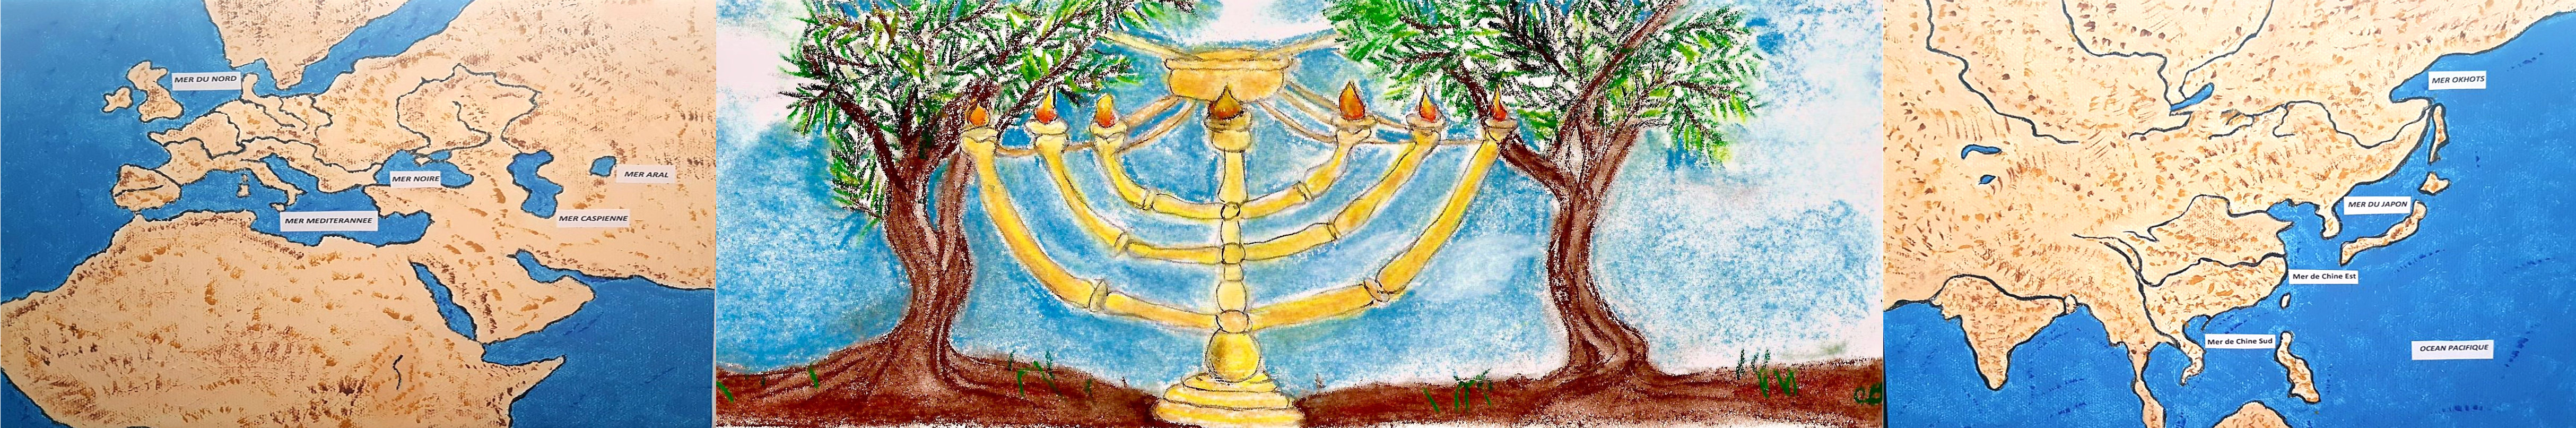 Handmade drawing of the candelabra and the two olive trees found in the Bible